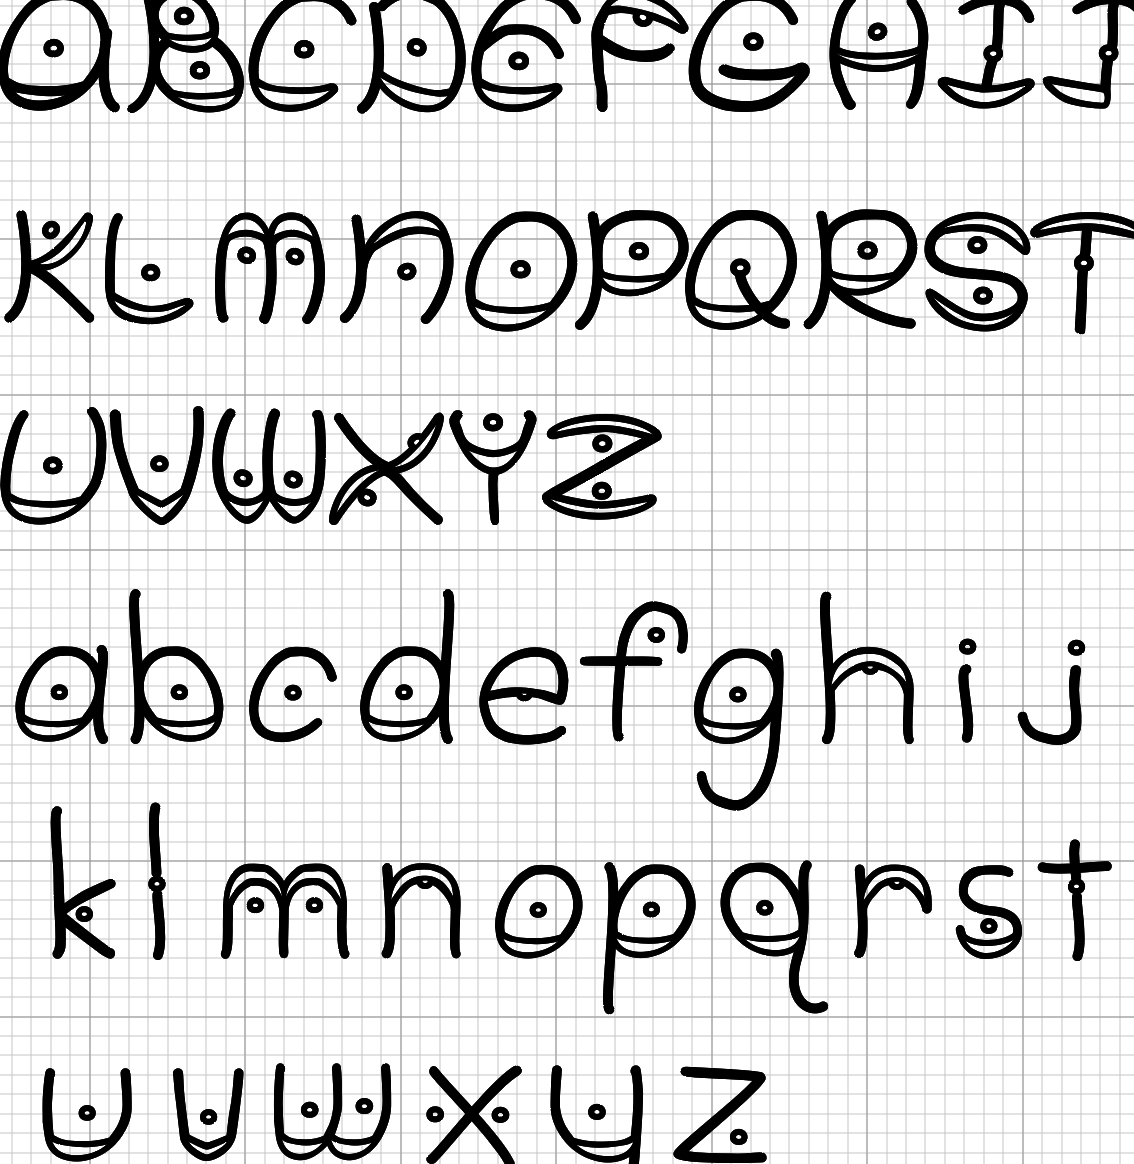 Example of a typeface